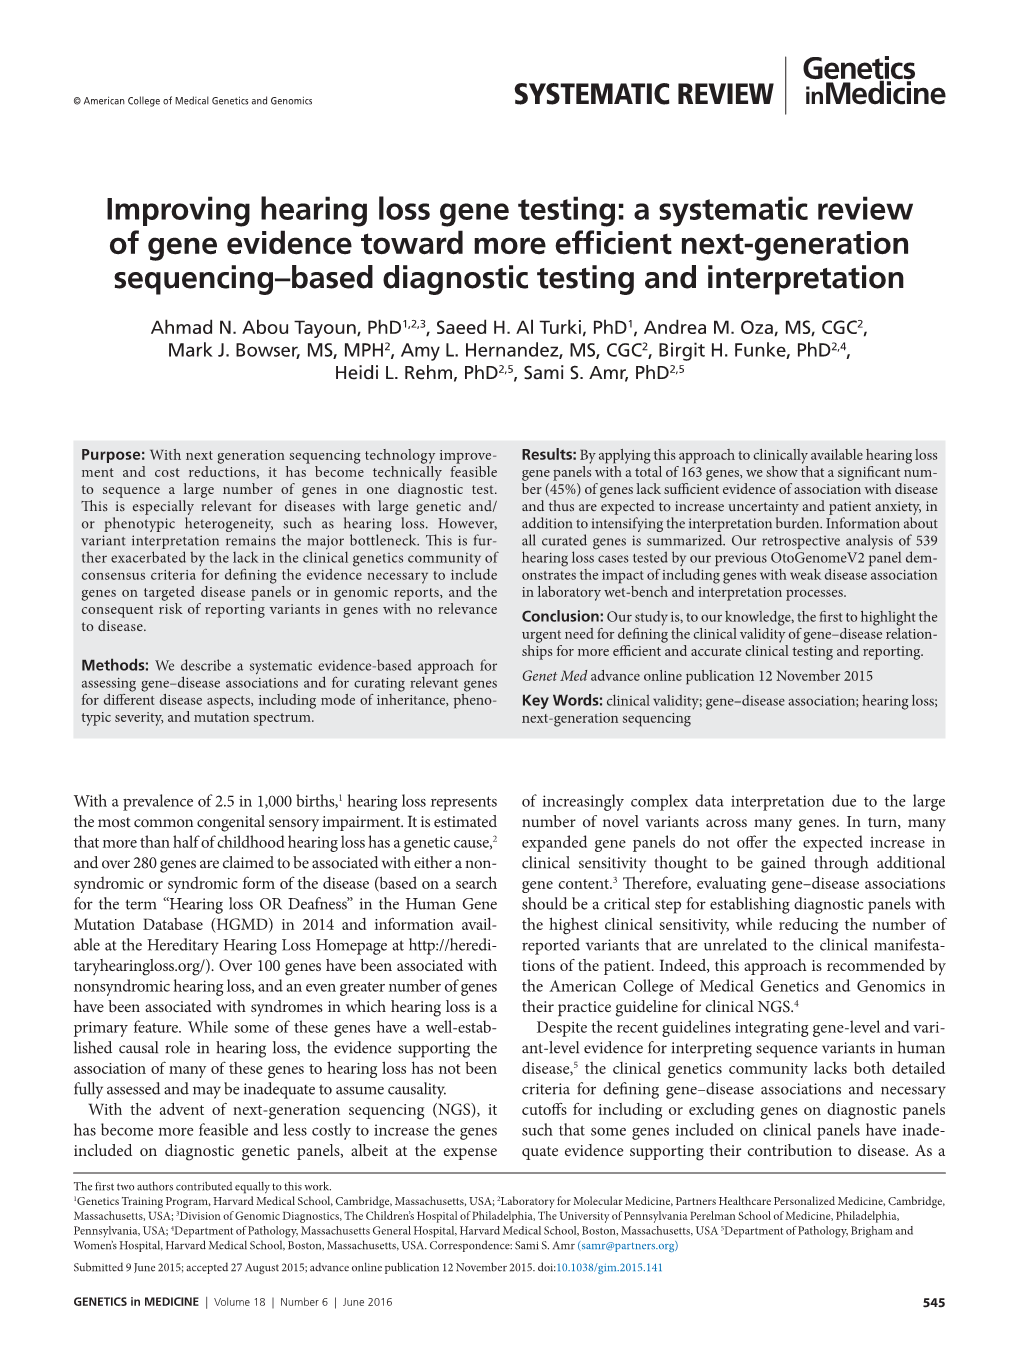 Improving Hearing Loss Gene Testing: a Systematic Review of Gene Evidence Toward More Efficient Next-Generation Sequencing–Based Diagnostic Testing and Interpretation